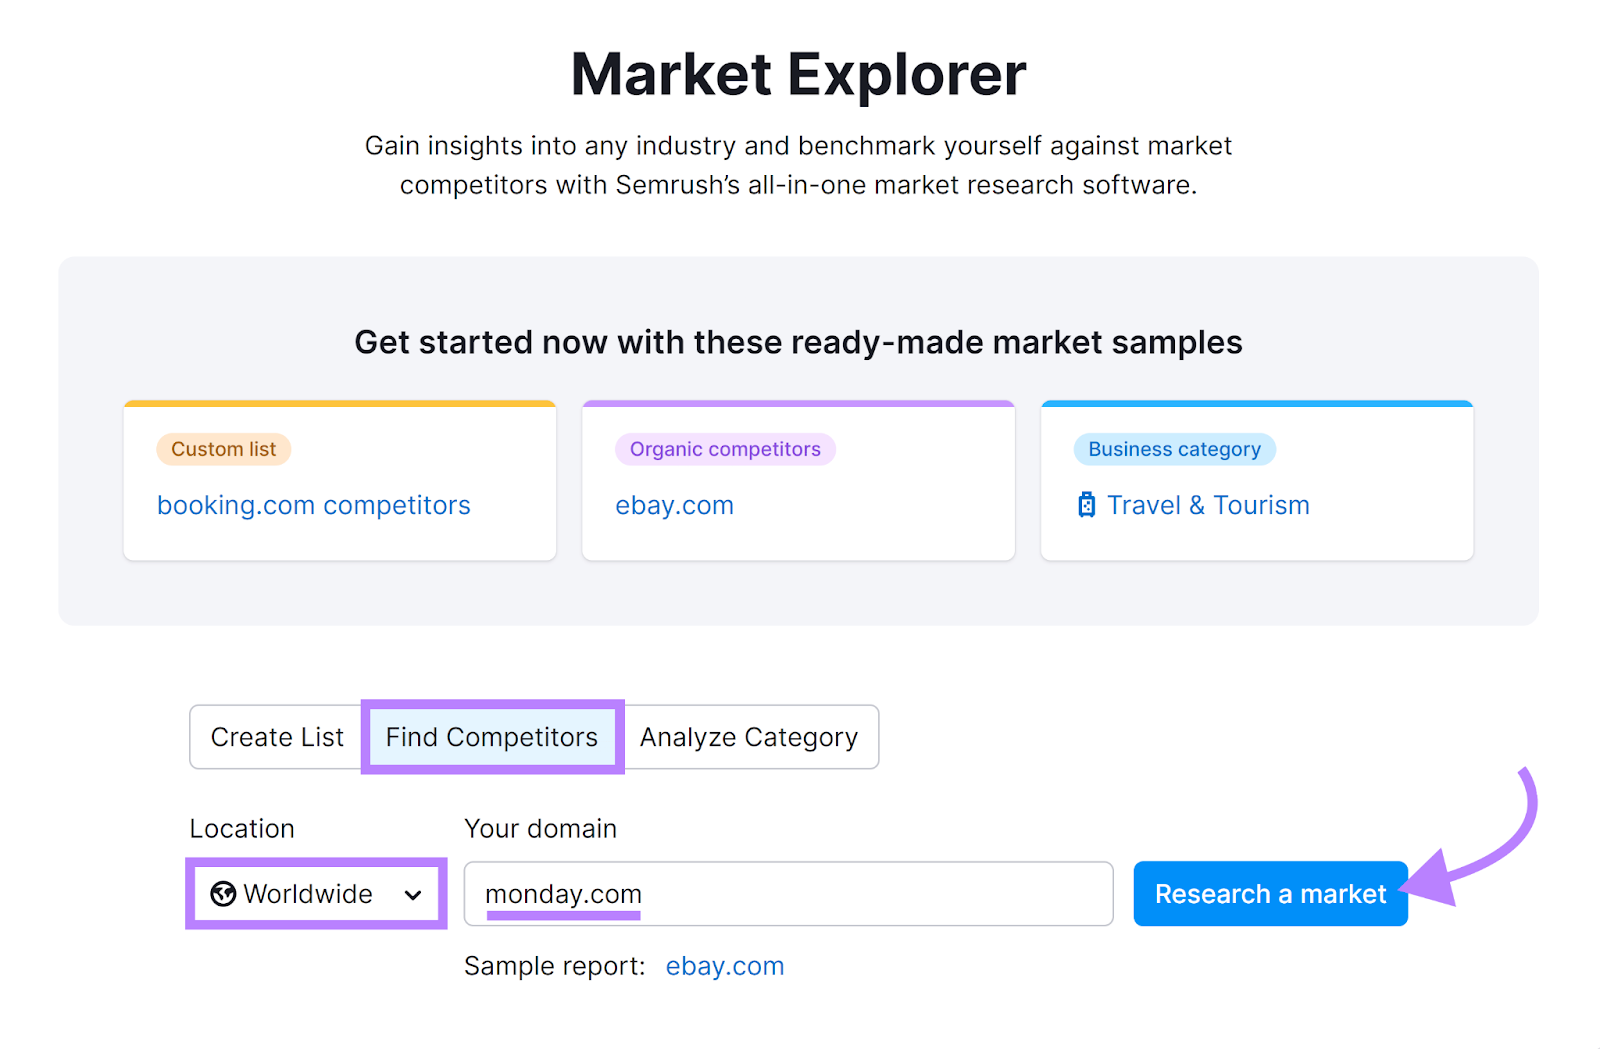 Market Explorer tool 'Find Competitors' selected, location 'Worldwide', Domain entered, and Research a market selected.